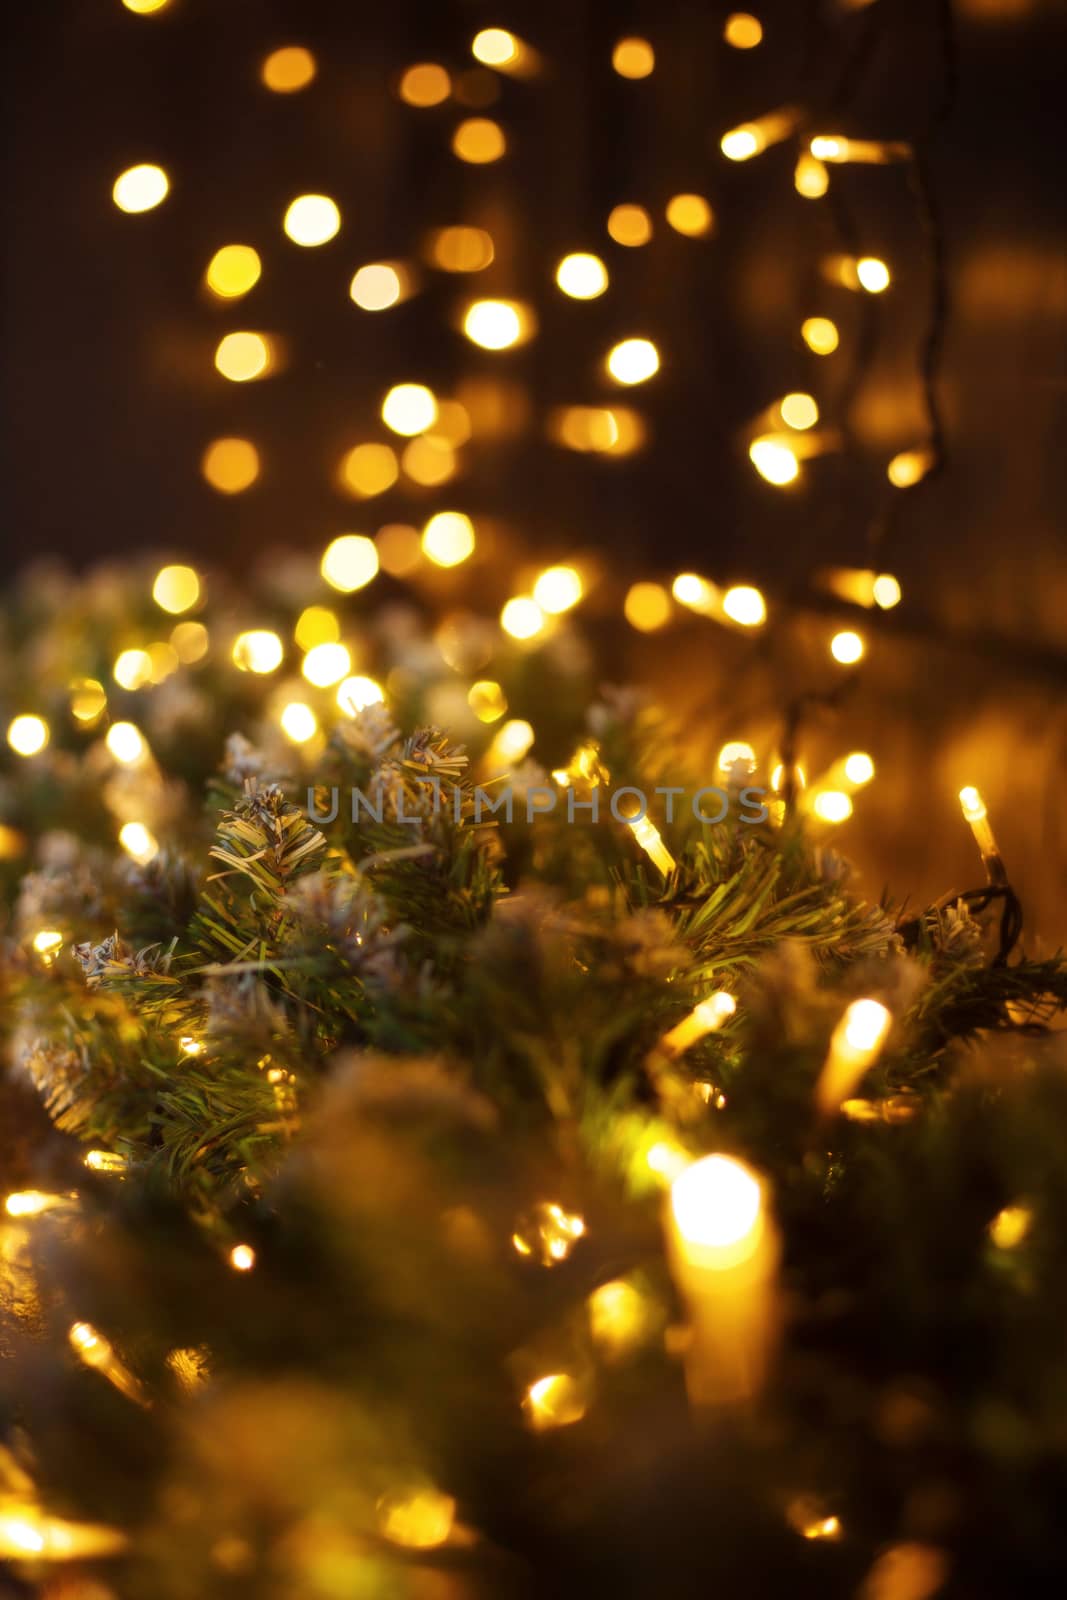 Christmas and New year decoration, defocused garland lights, bokeh effect.